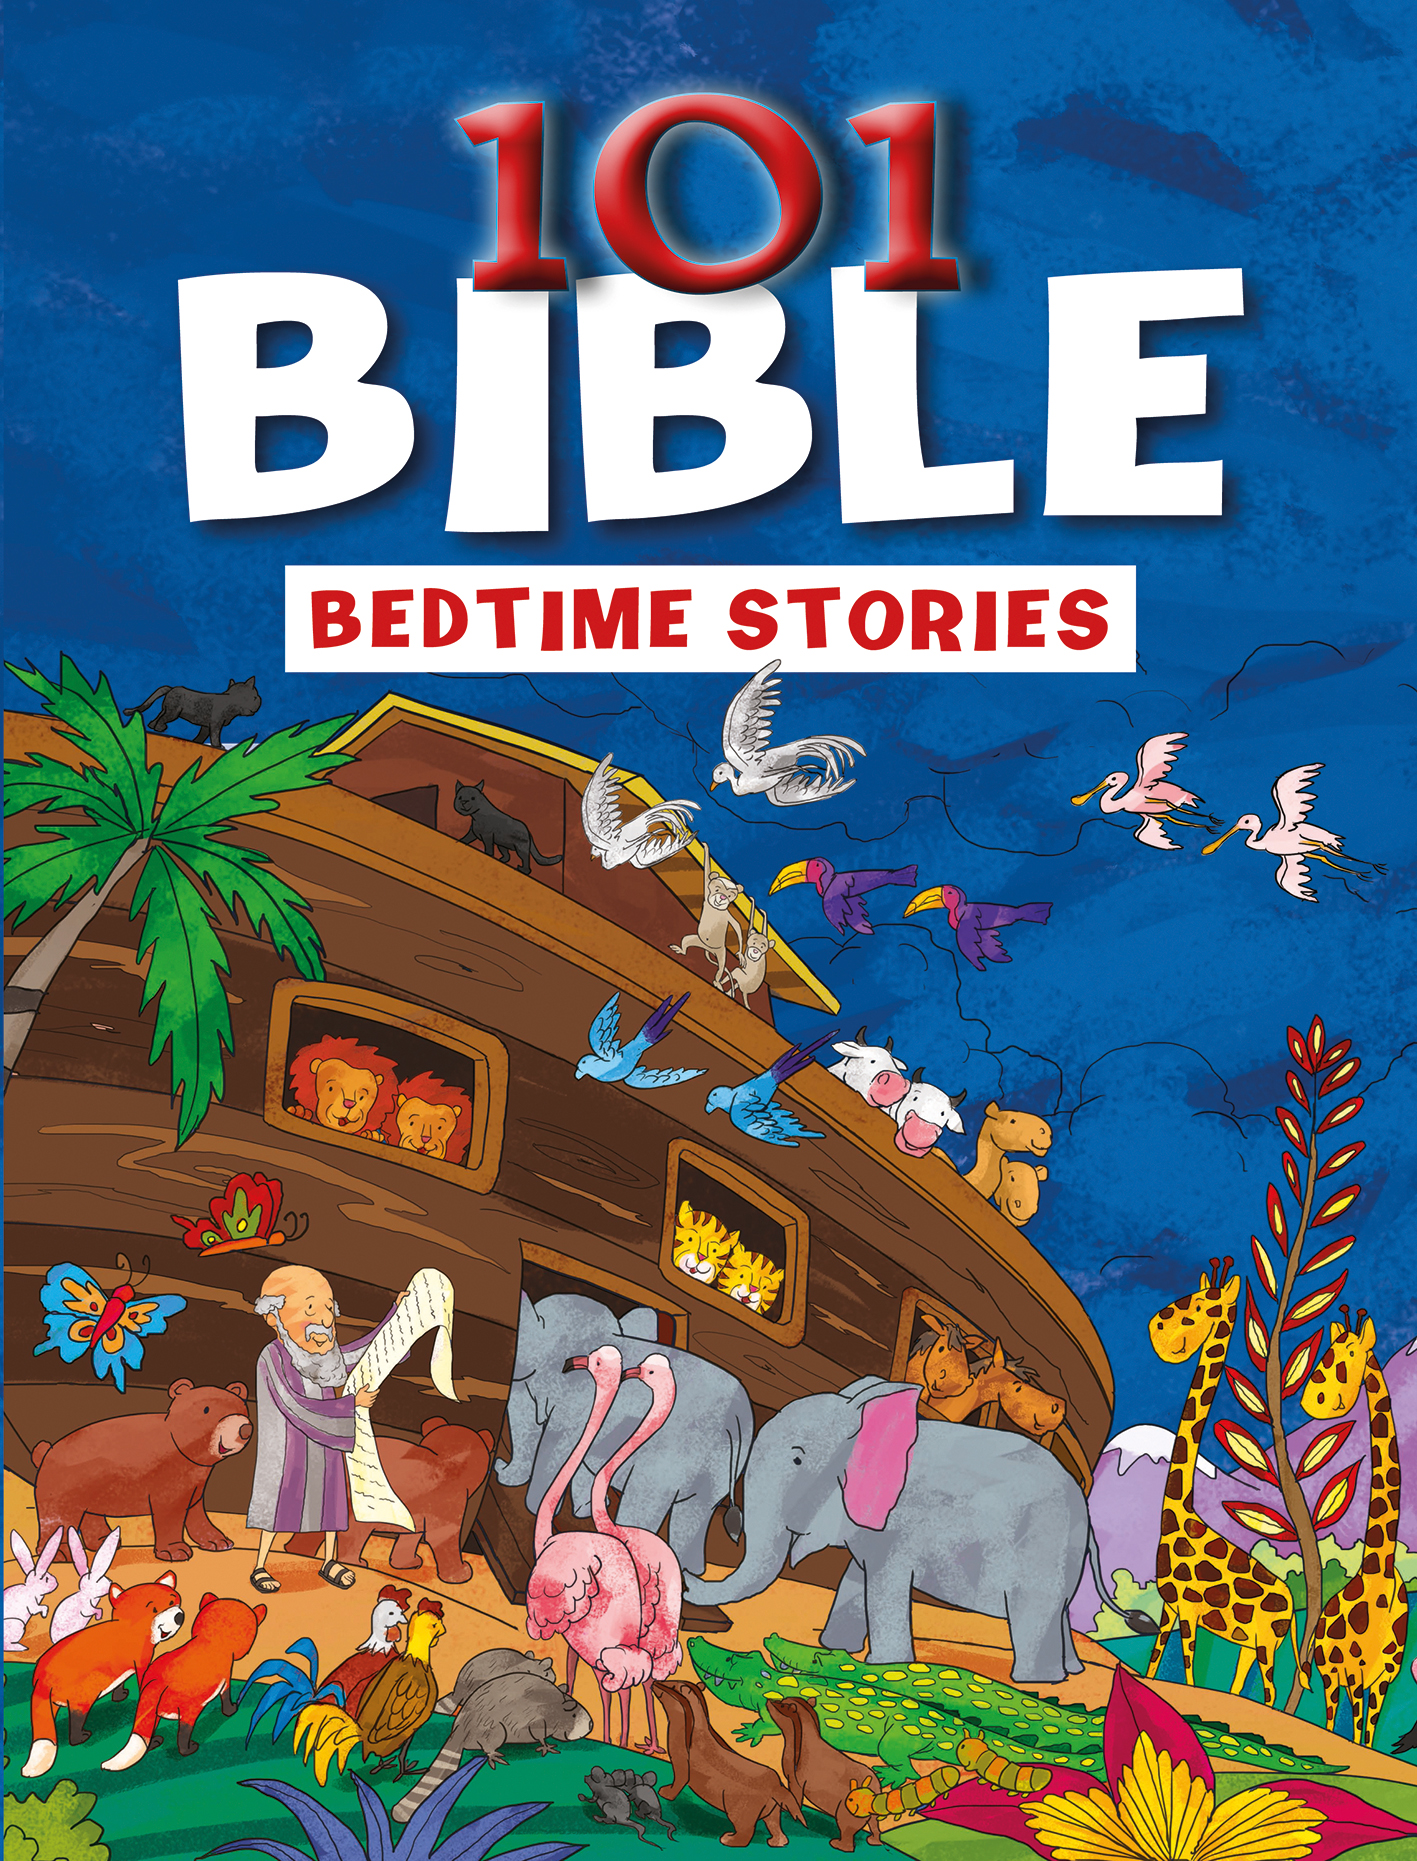 bible stories time travel